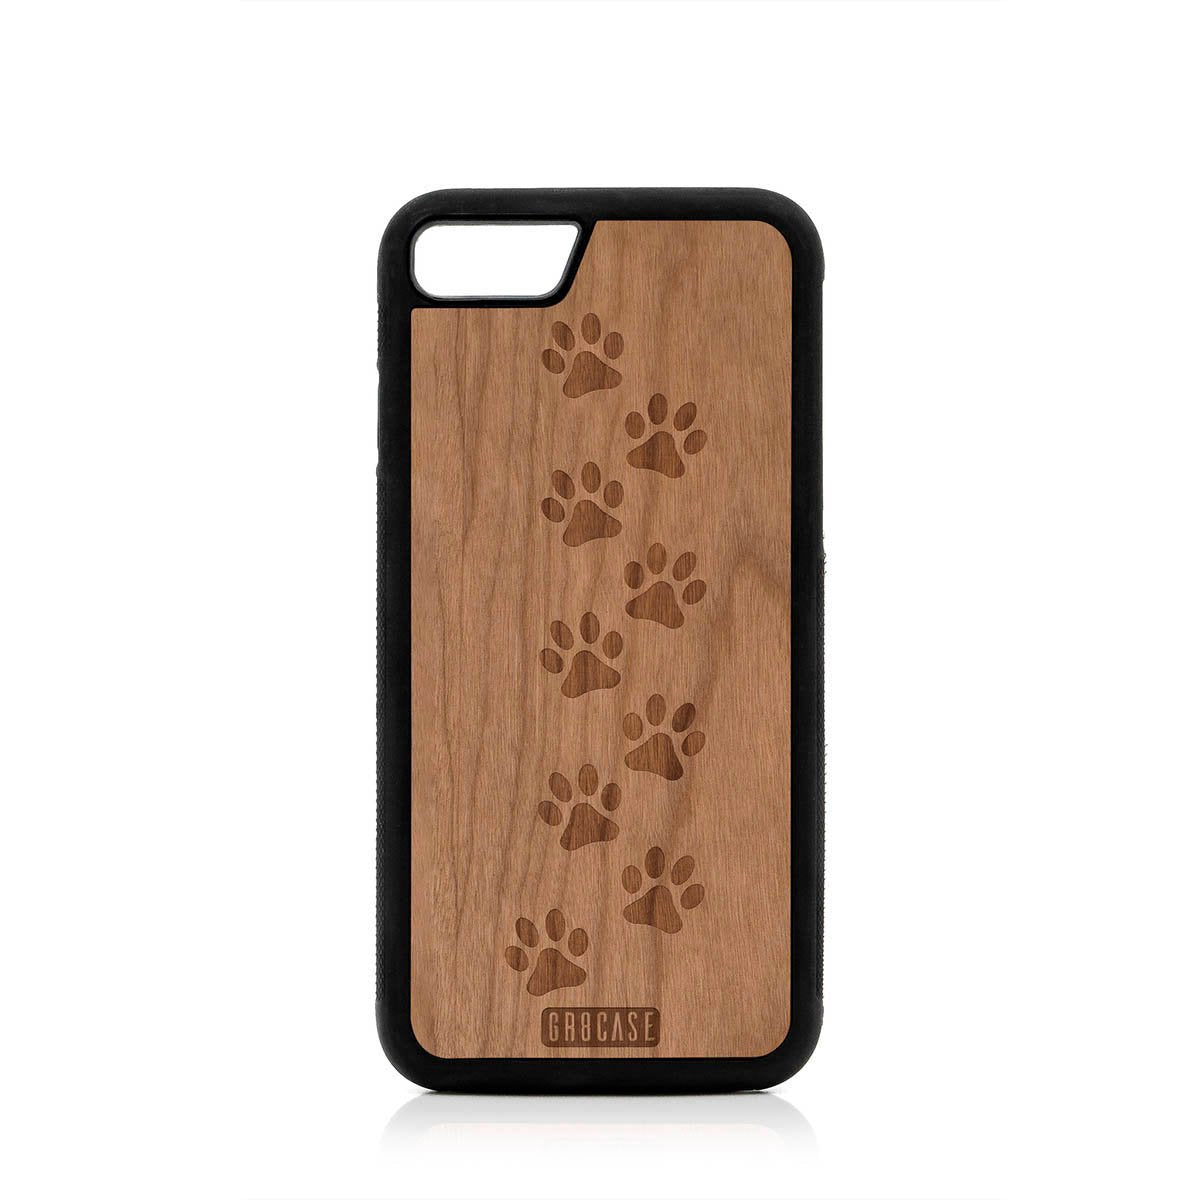 Paw Prints Design Wood Case For iPhone SE 2020 by GR8CASE